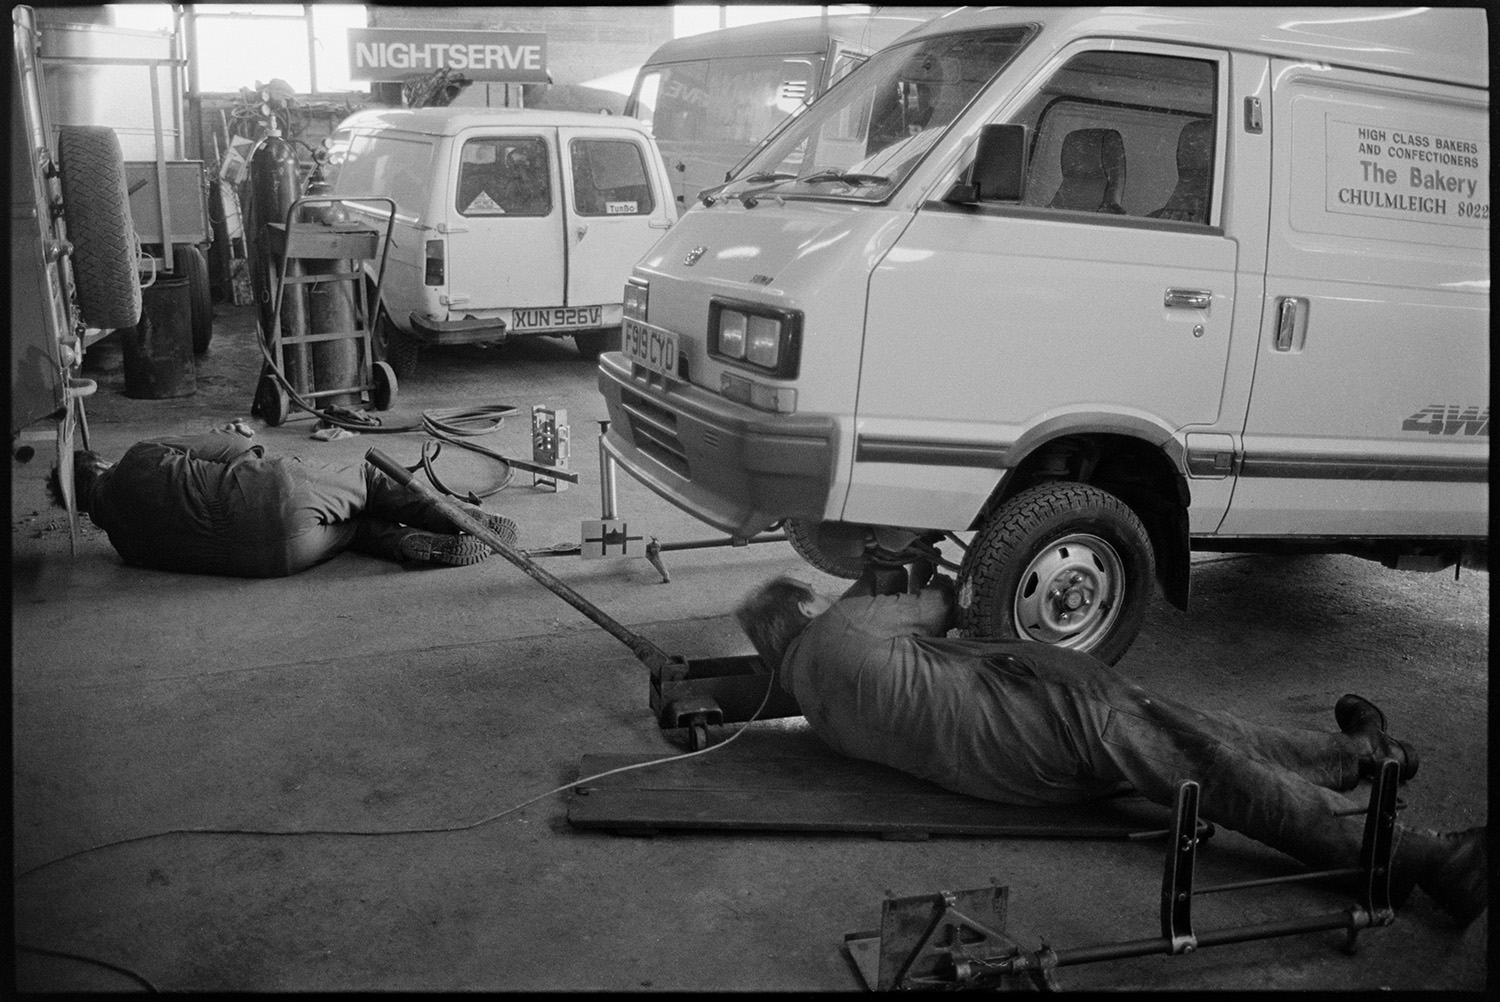 Garage workshop, mechanics at work, proprietor chatting man in store room, Land Rover. 
[Two mechanics working on a Land Rover and a van at the Winston Pincombe Garage in South Molton Street, Chulmleigh. More vans can be seen in the background.]